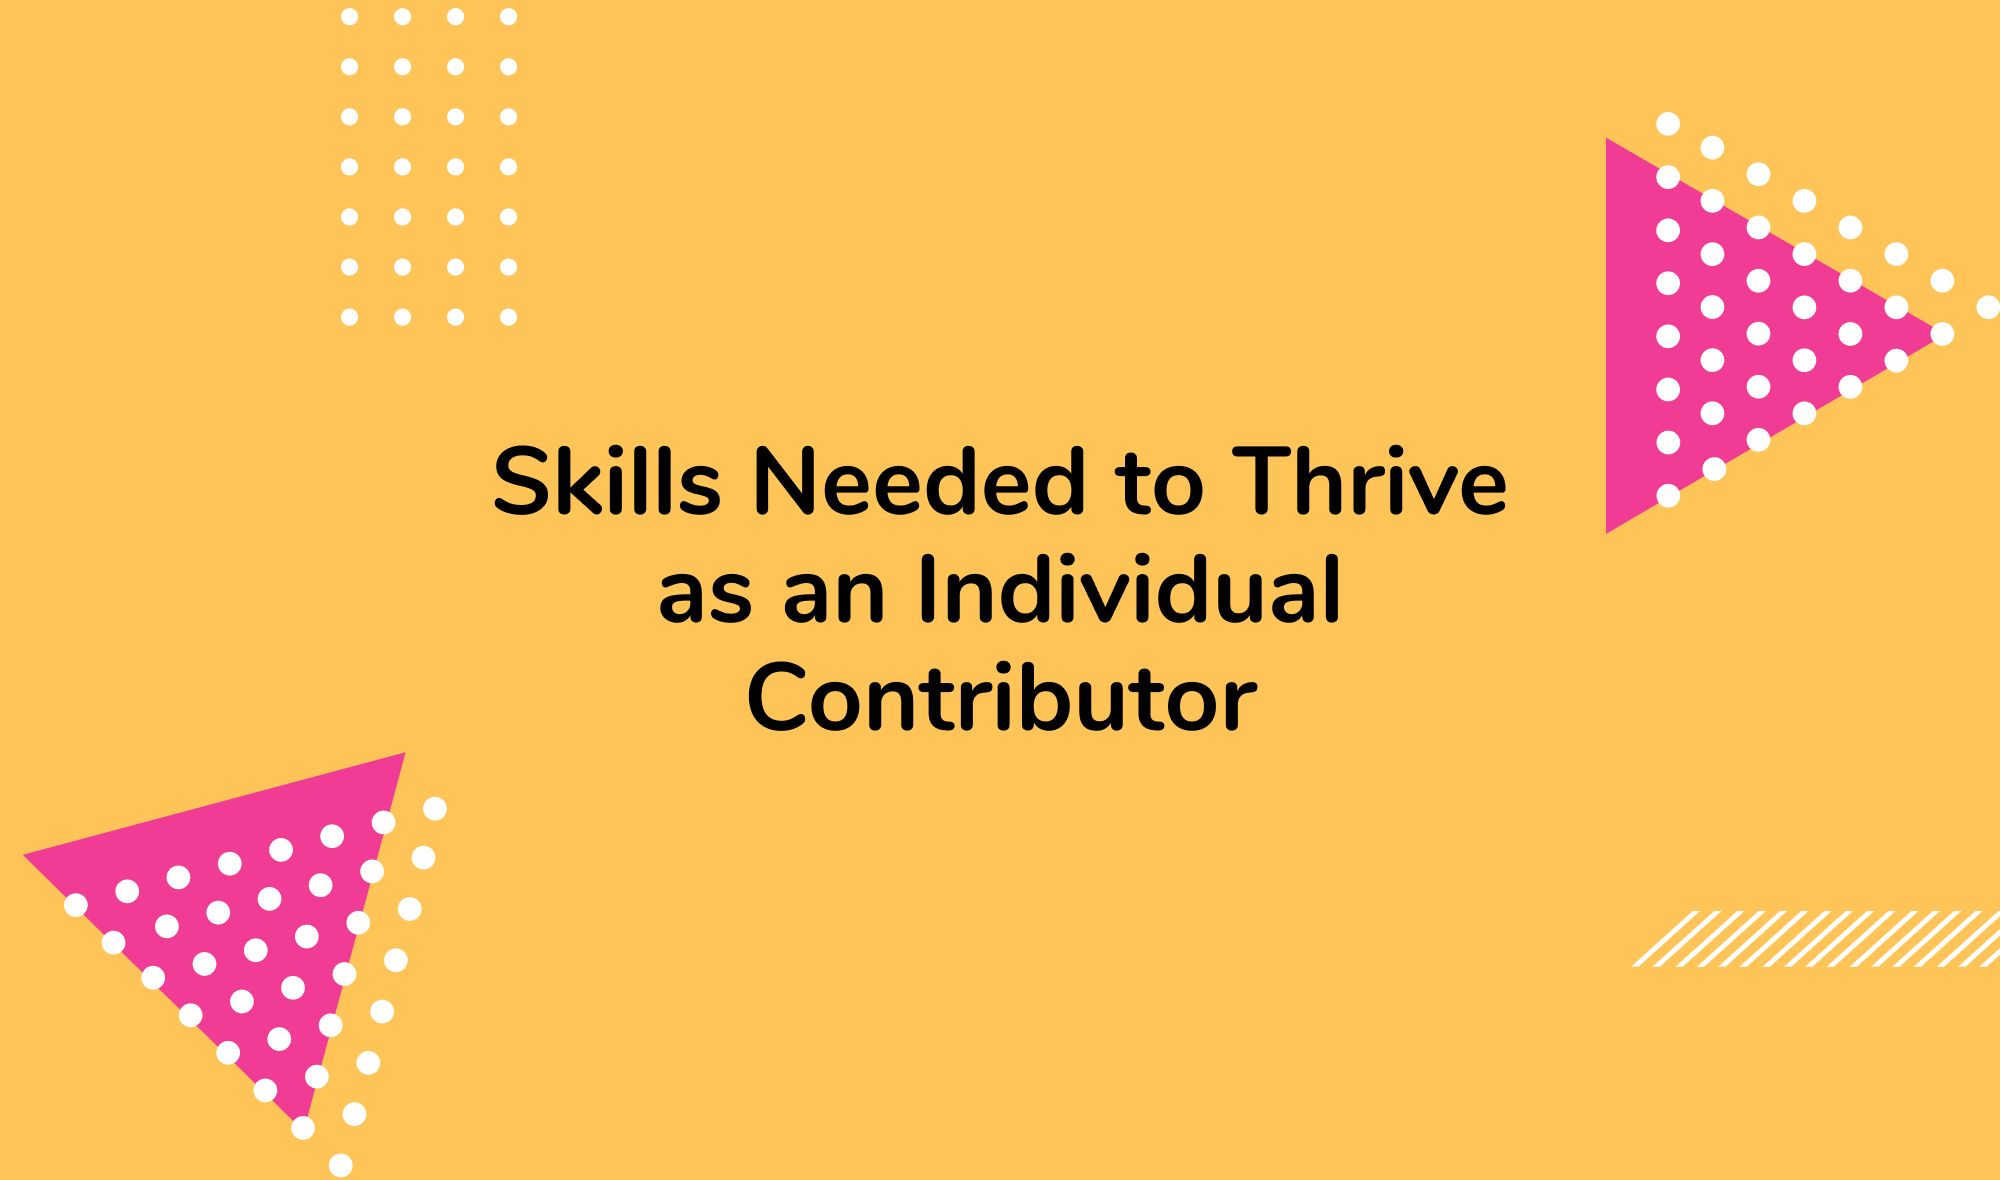 Skills Needed to Thrive as an Individual Contributor